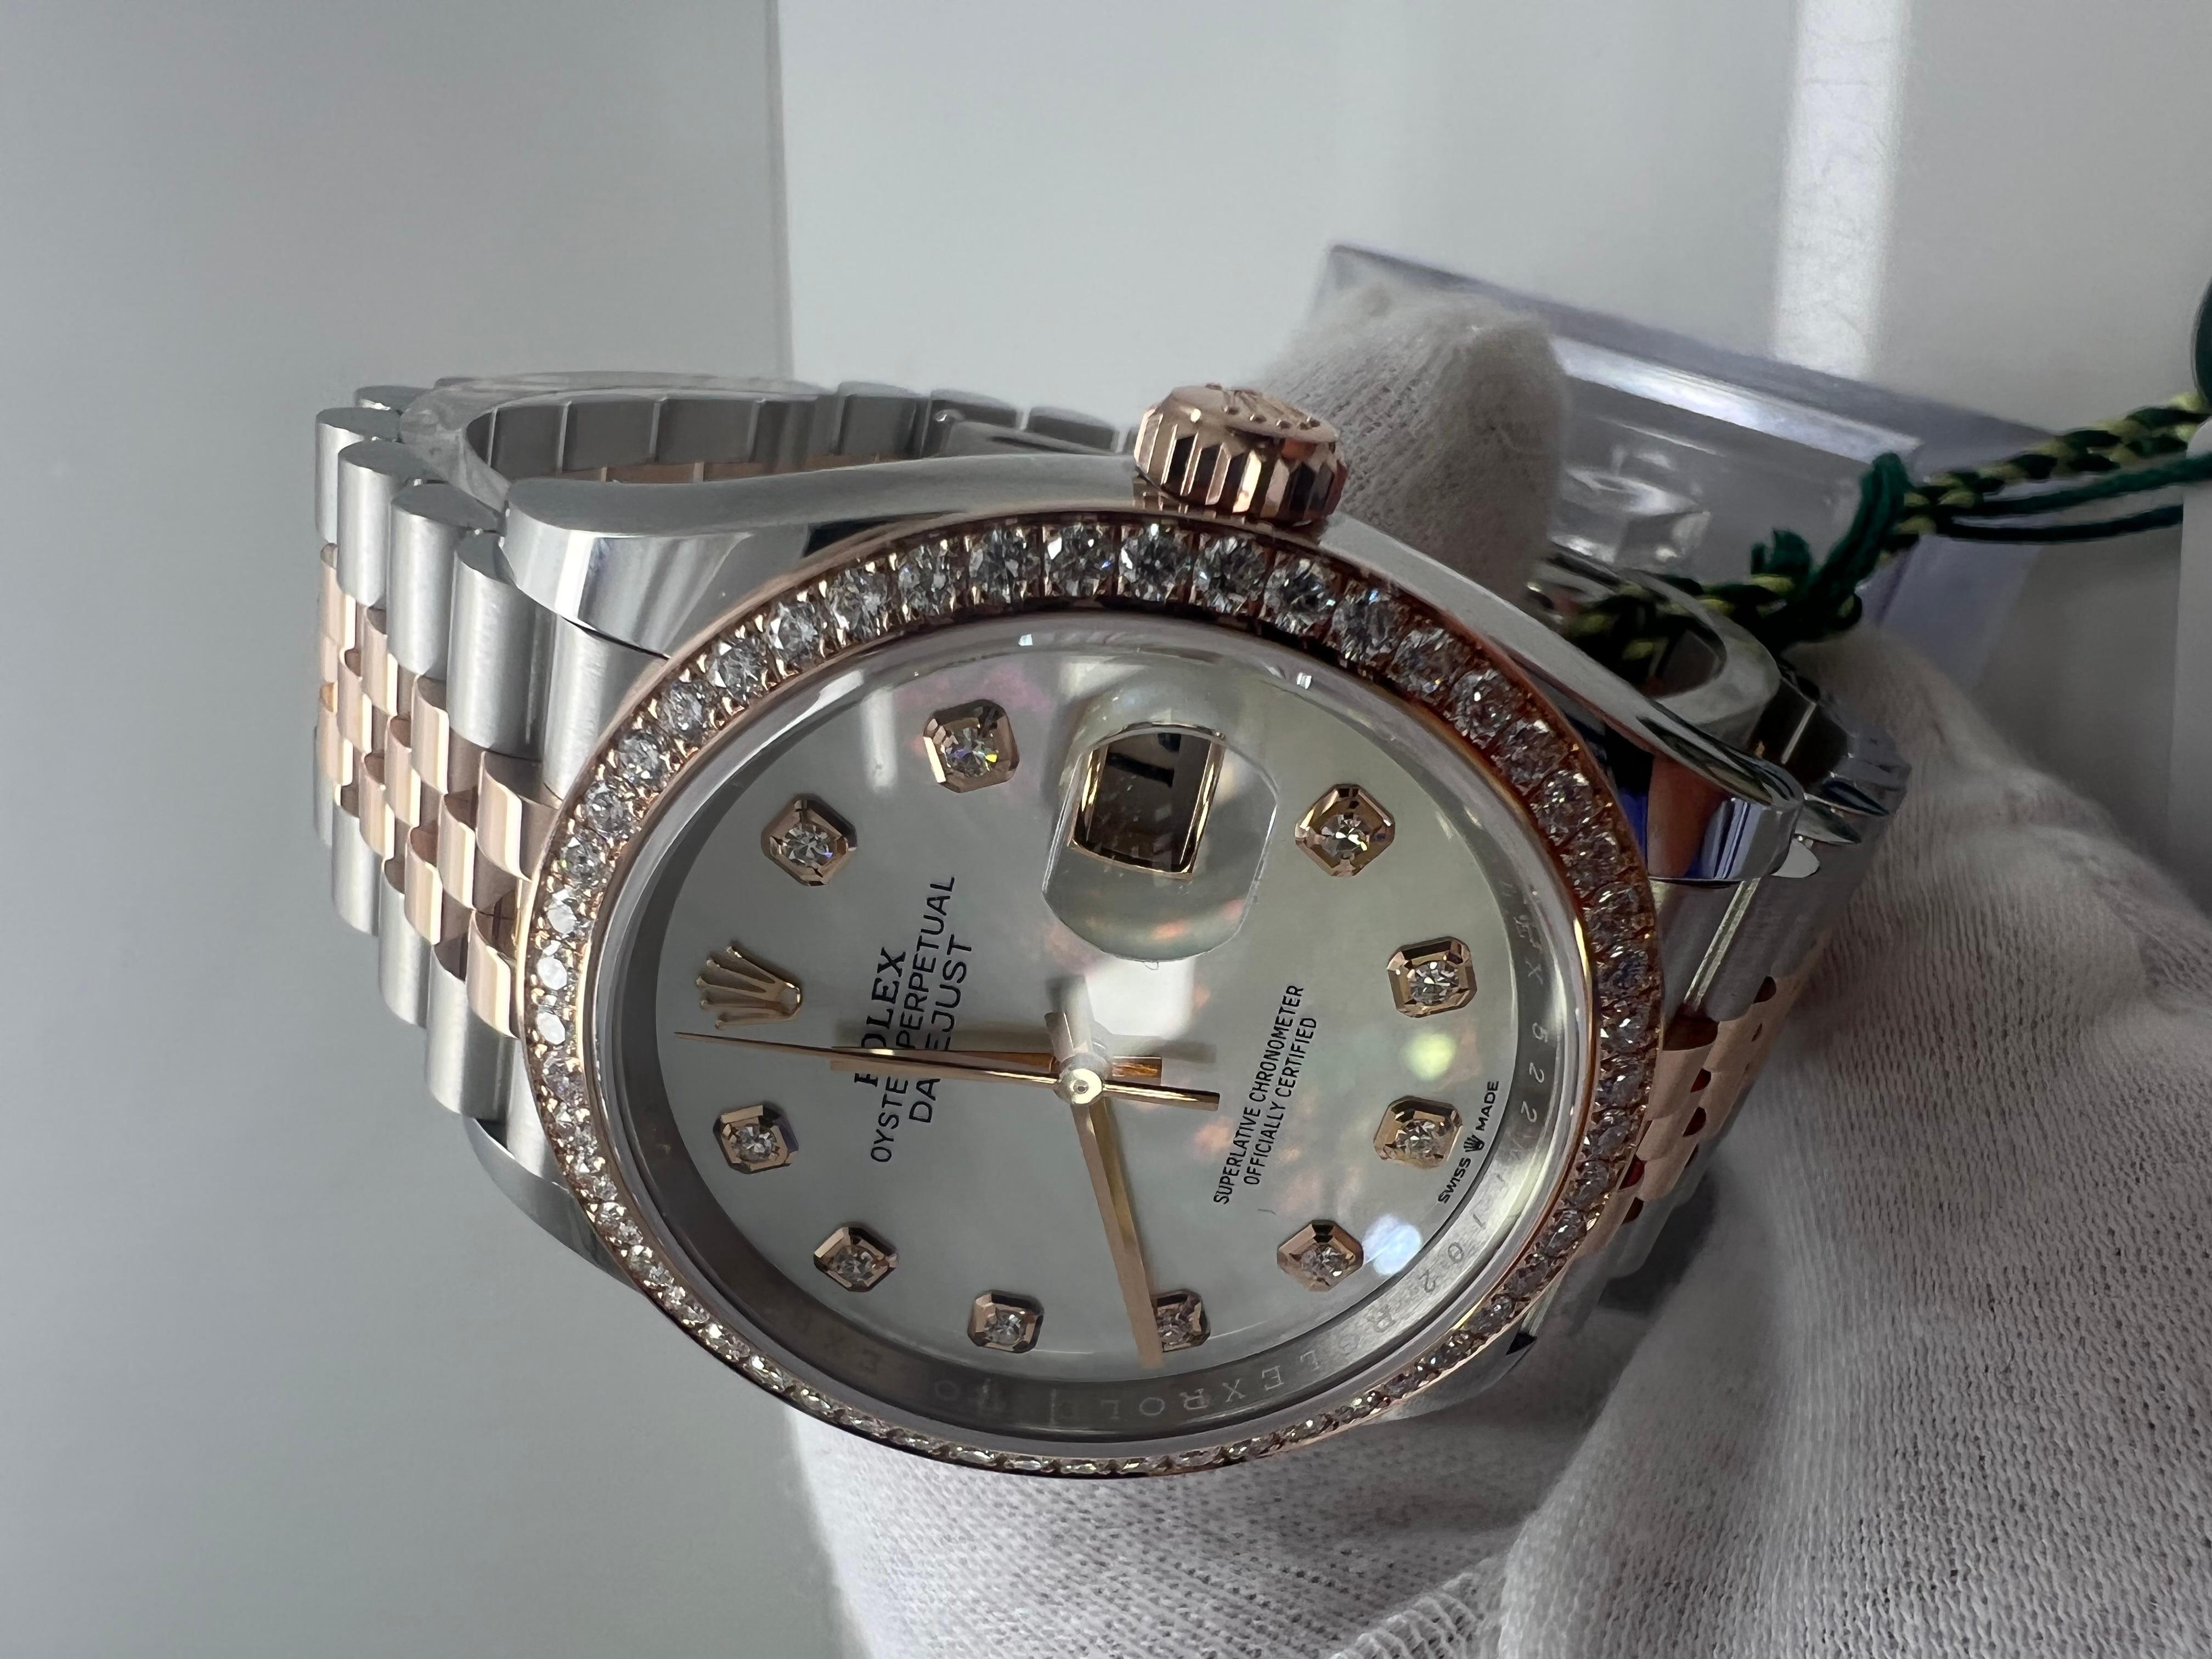 Rolex Datejust 36mm Rose gold/steel White Mother of Pearl Diamond Dial Watch

Brand new 2022

includes original Rolex Box and Paperwork

All original Rolex Parts

5 year Rolex warranty

shop with confidence 

Evita Diamonds
Since 1992